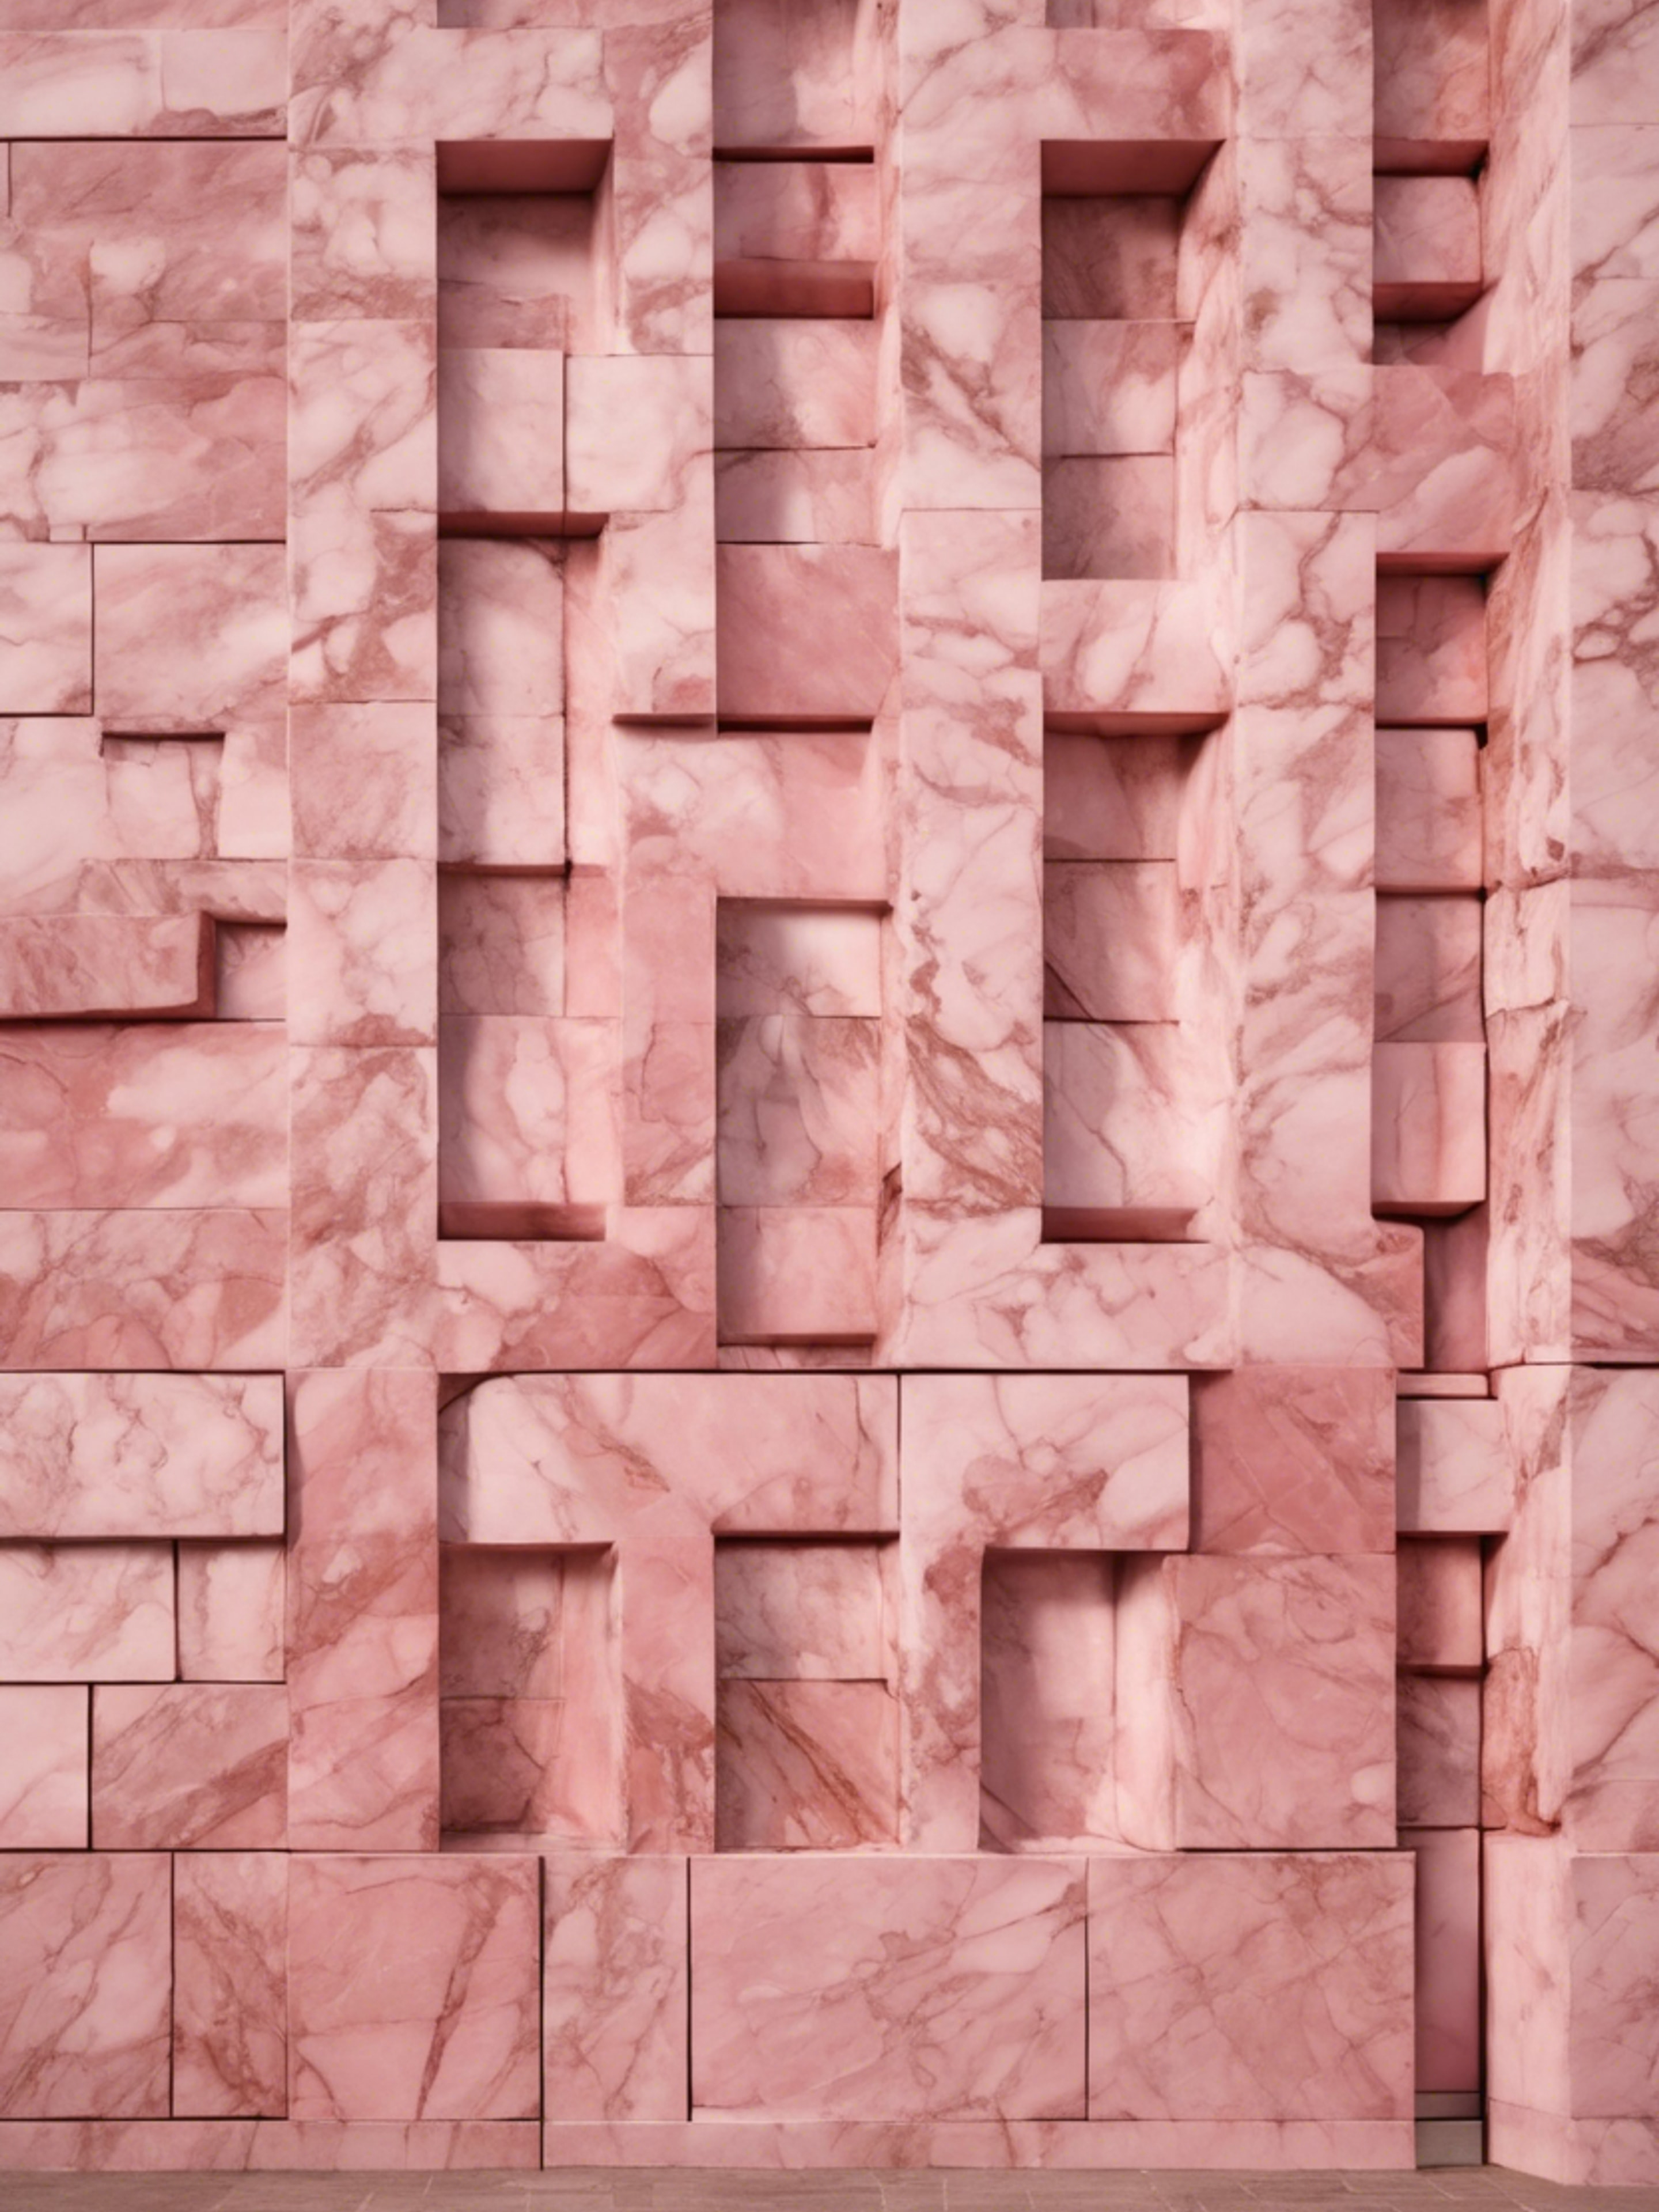 An outdoor wall of a building, made of polished pink marble. Behang[24255f95efd34f59a019]